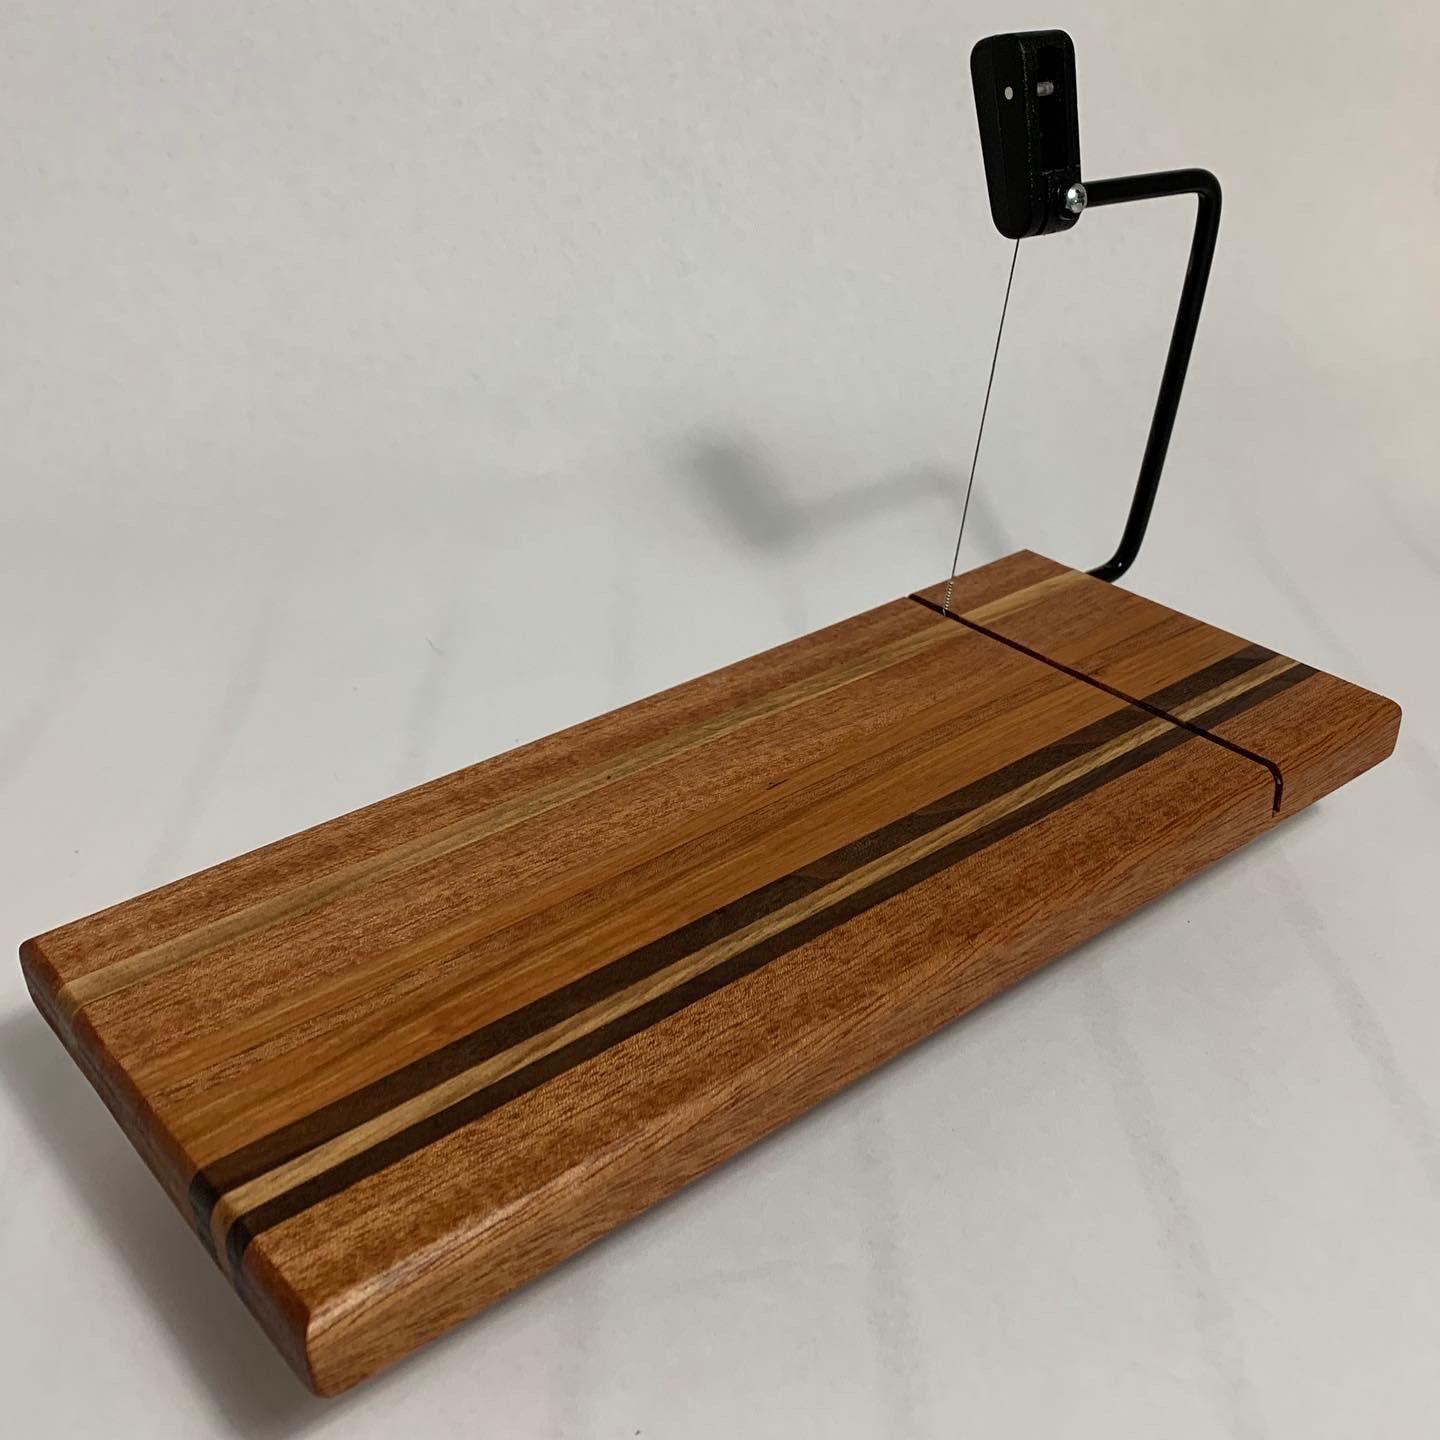 A wooden cutting board with a metal holder attached to it